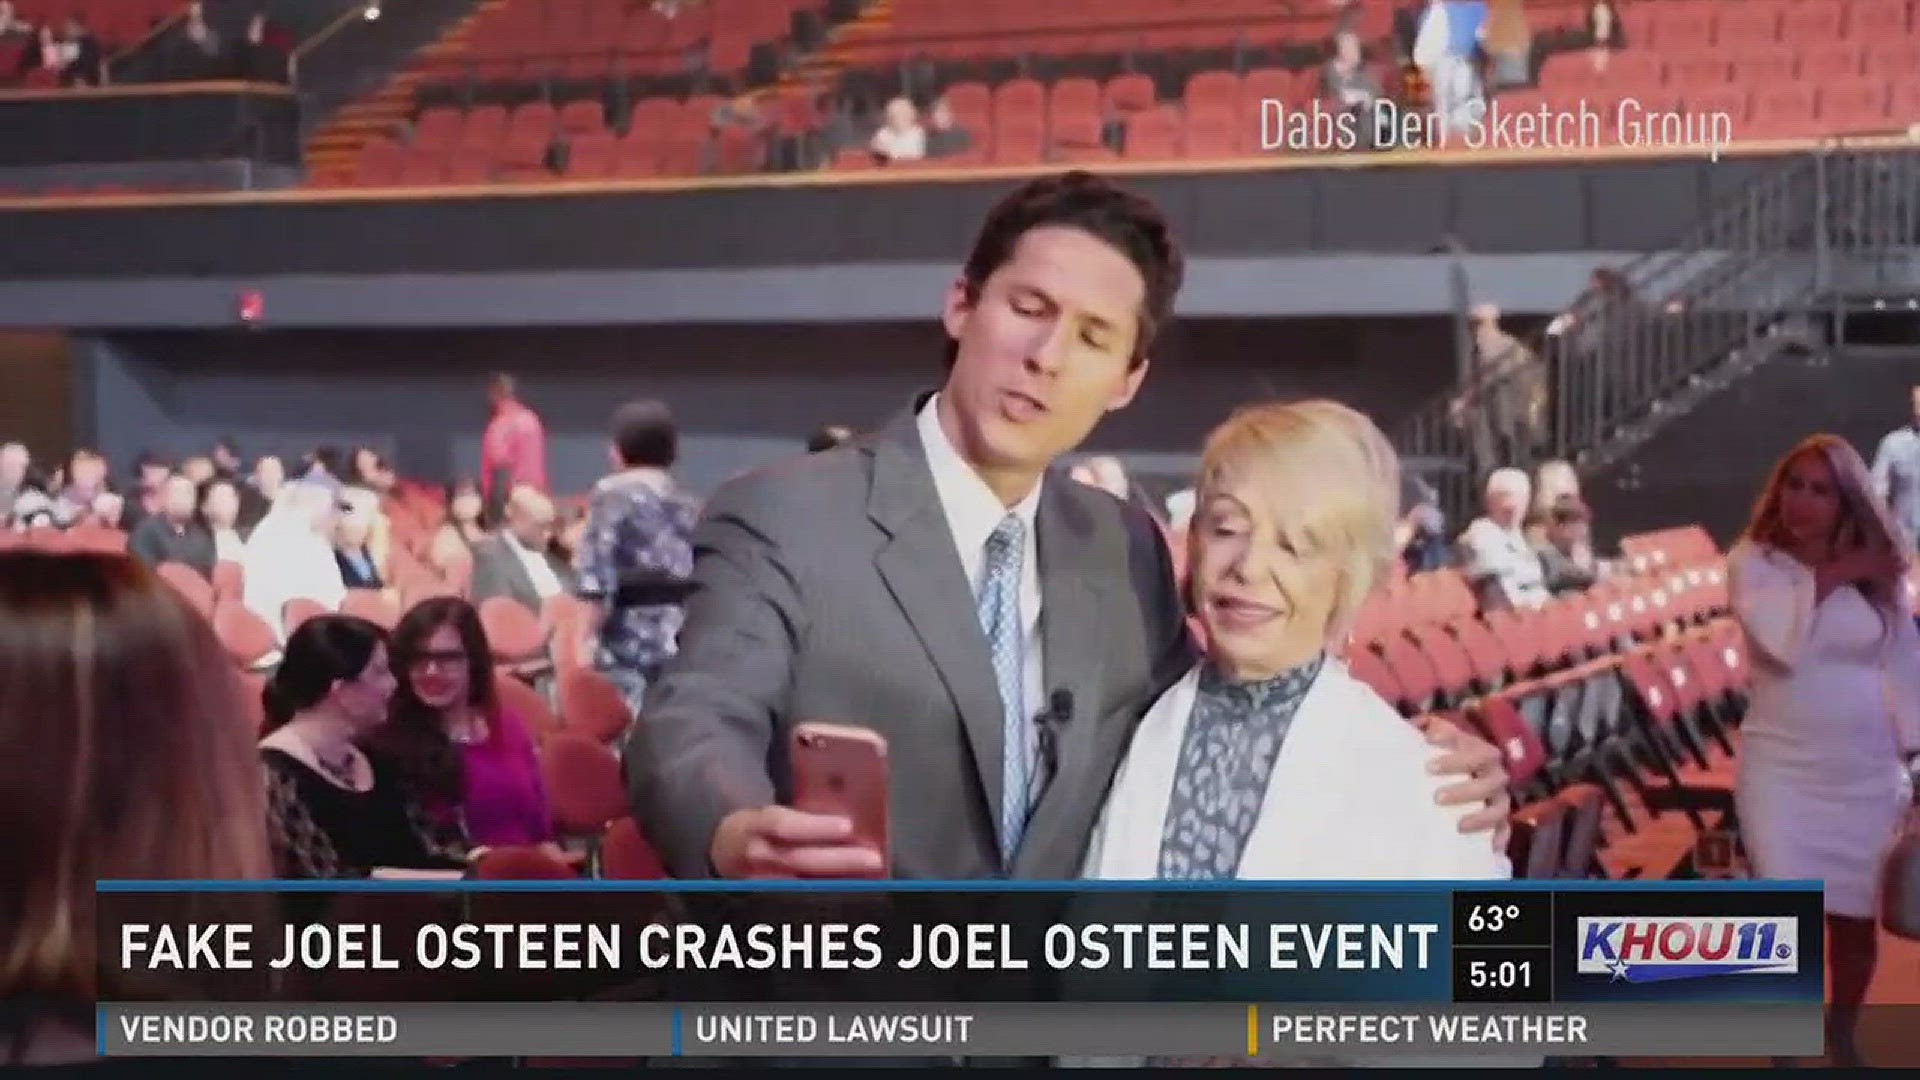 So what happens when a guy who looks and dresses like Joel Osteen goes to a Joel Osteen "night of hope?" He gets free parking, gets into the venue and poses with Joel fans, of course.